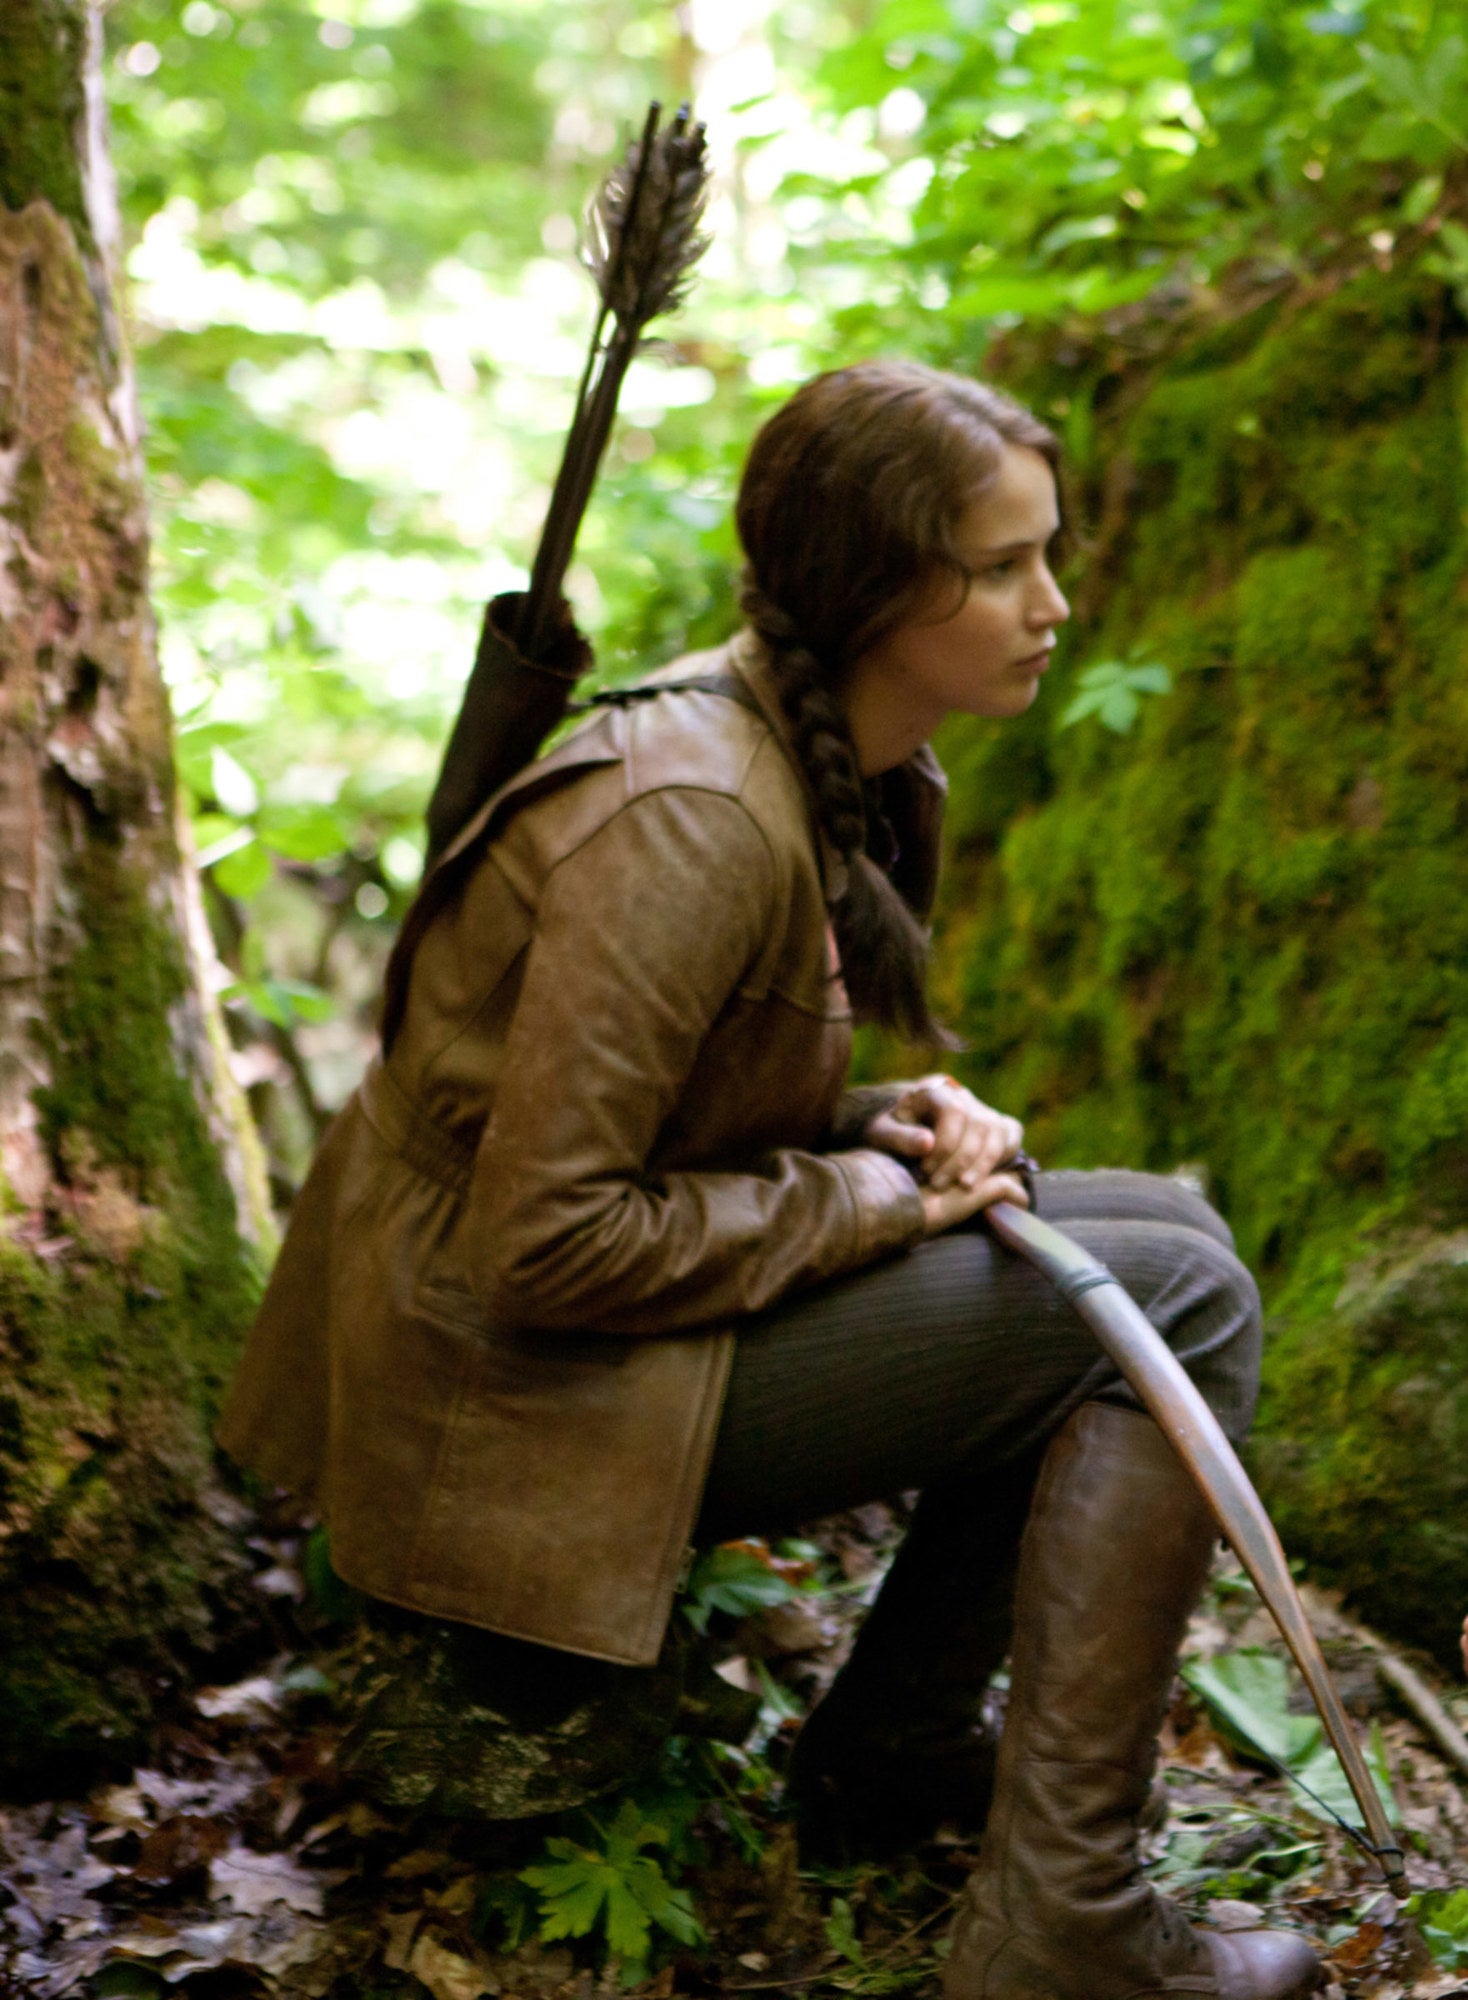 Gale and Katniss speak in the woods